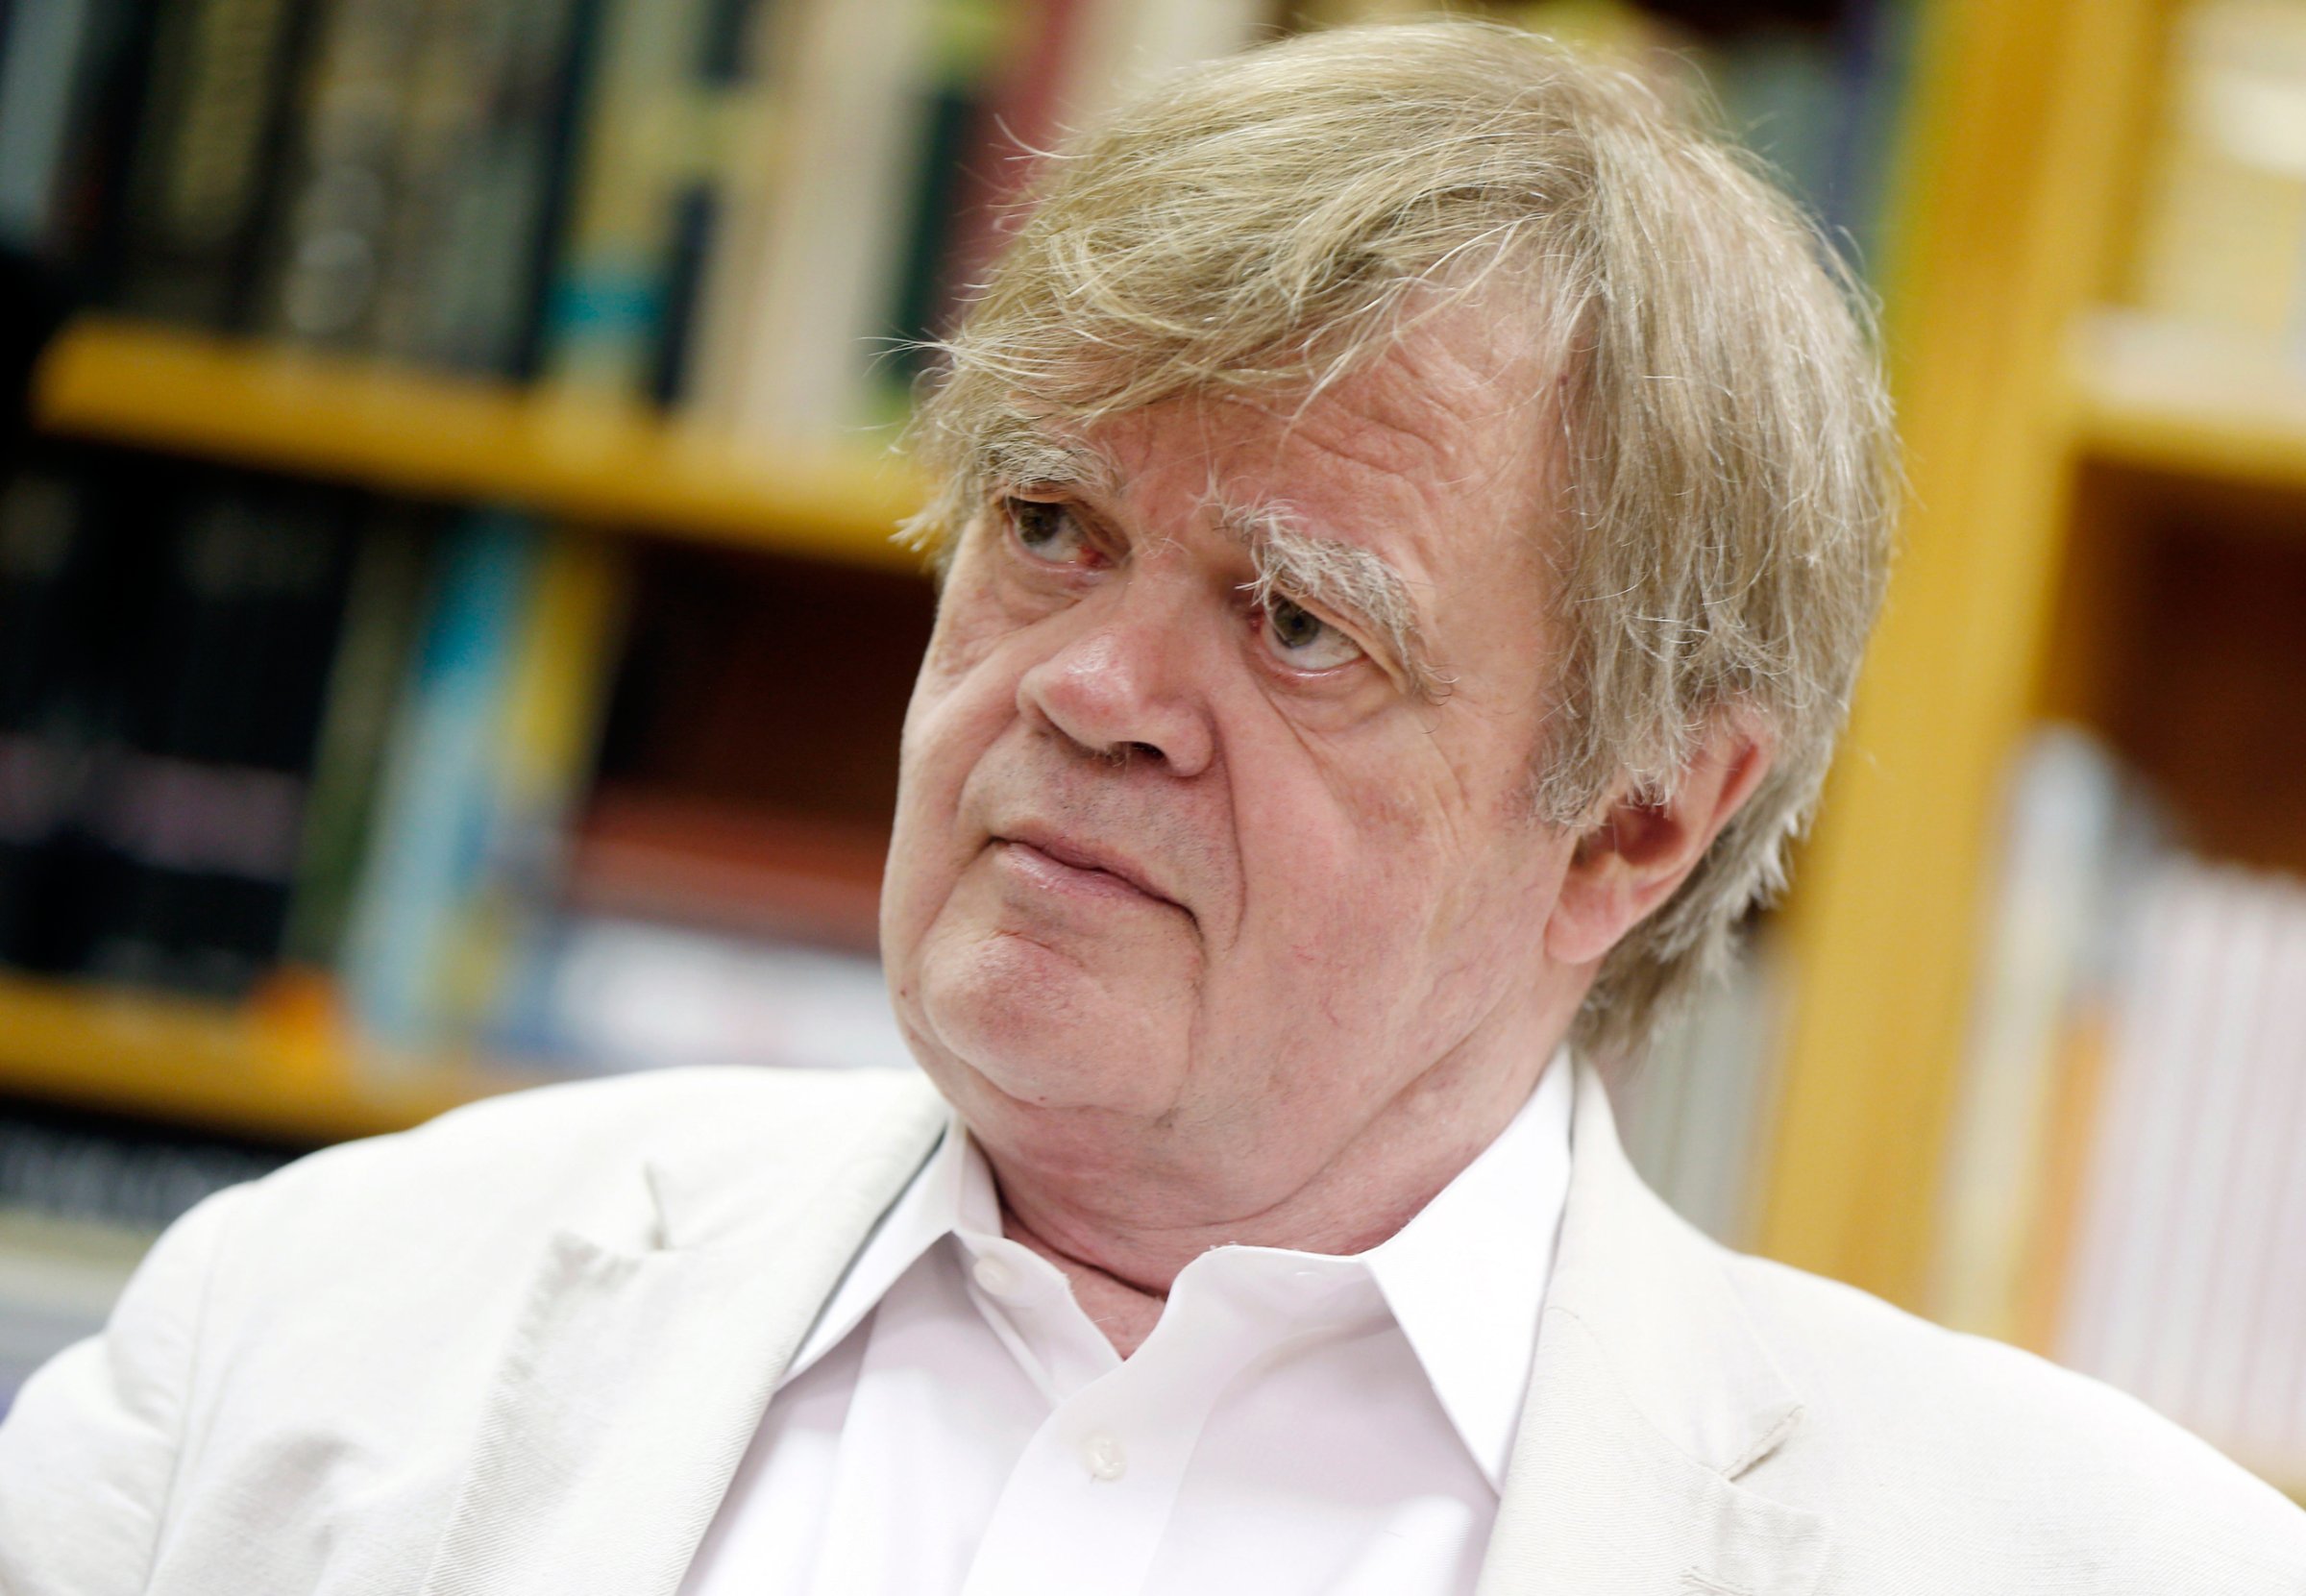 Garrison Keillor, creator and host of "A Prairie Home Companion, in an interview by The Associated Press, Monday, July 20, 2015, in St. Paul, Minn., said he plans to step down after next season and retire such popular sketches as “Guy Noir, Private Eye.” (AP Photo/Jim Mone)